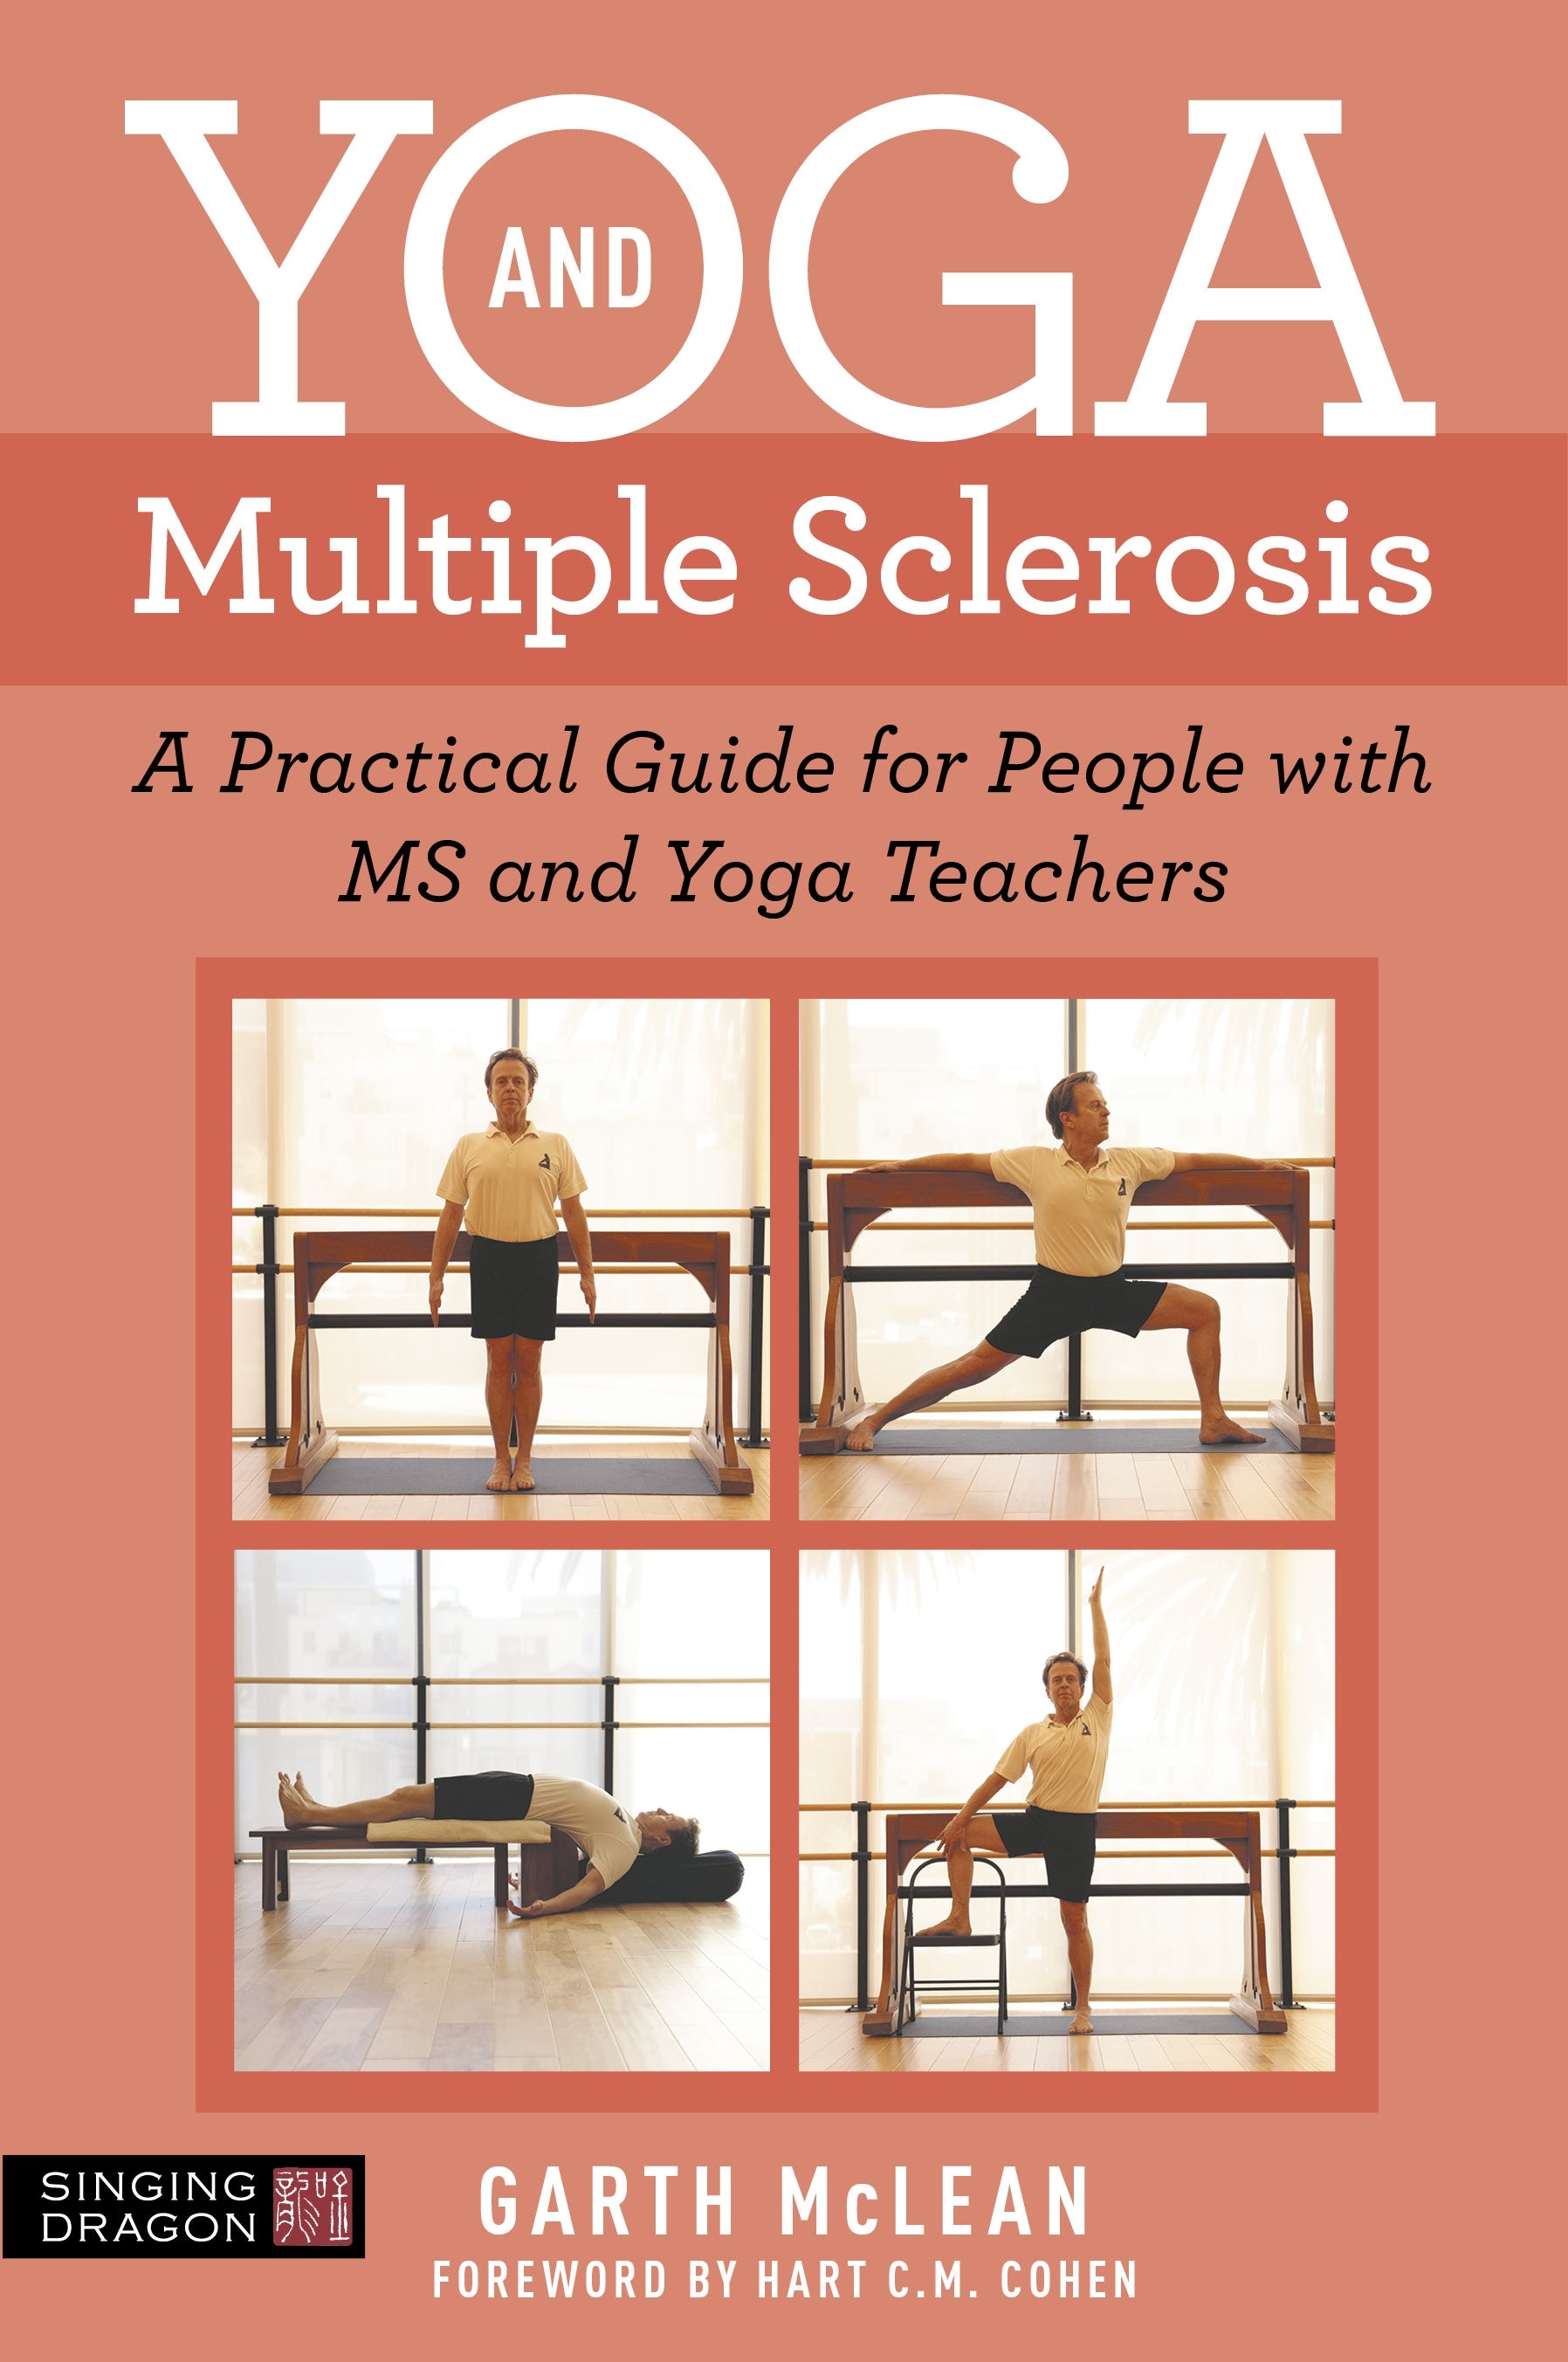 Yoga and Multiple Sclerosis by Garth McLean, Hart C.M. Cohen